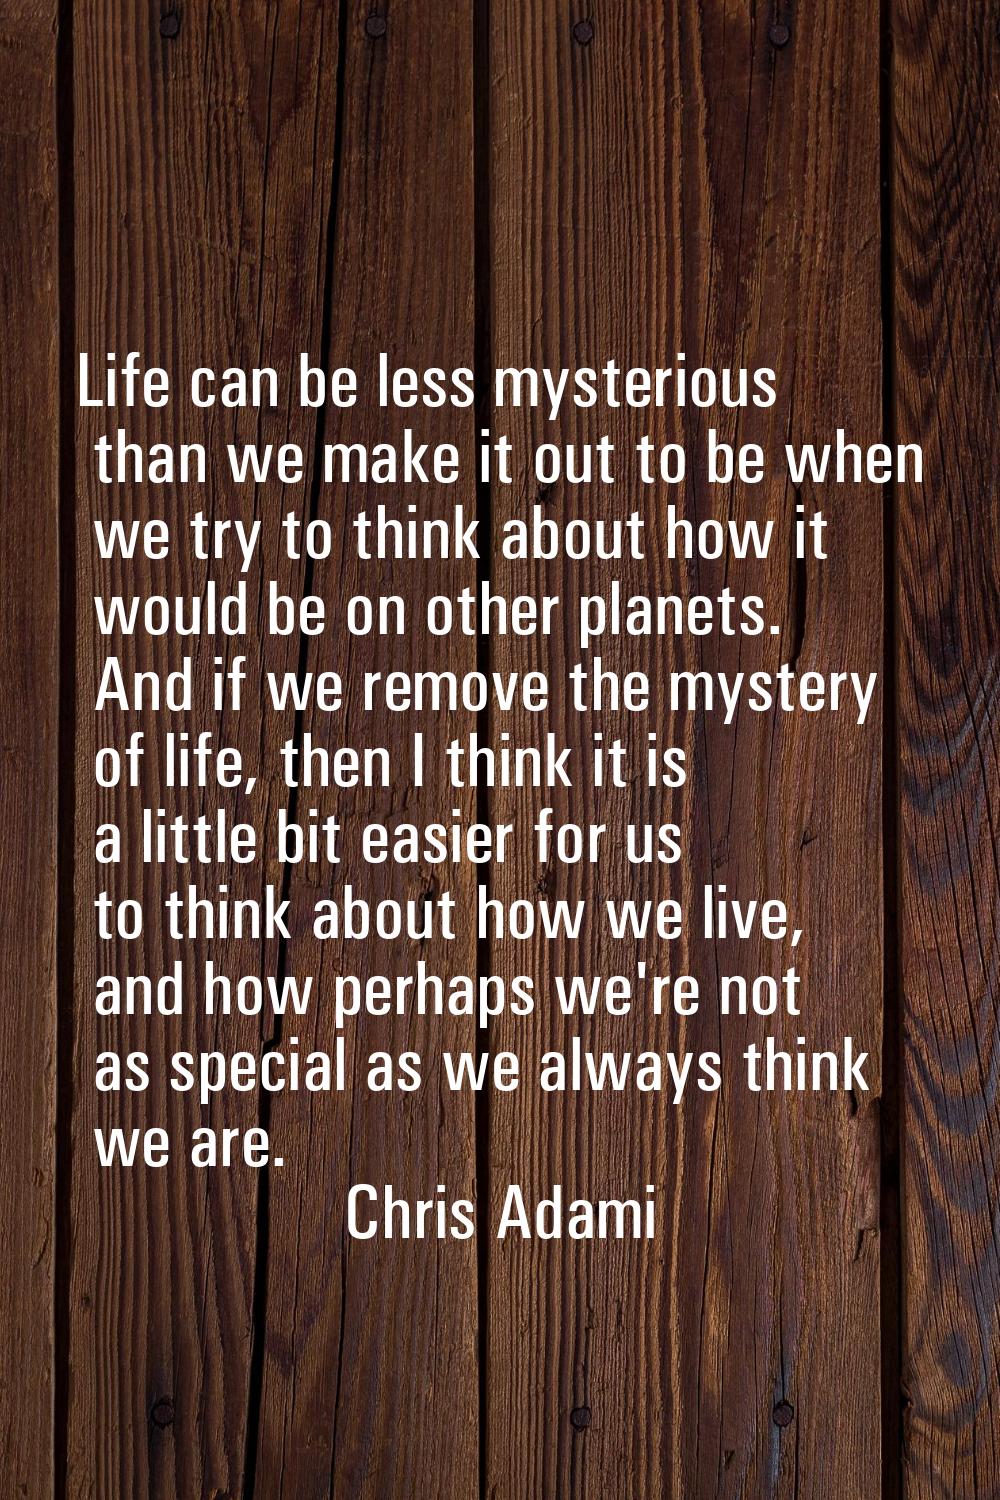 Life can be less mysterious than we make it out to be when we try to think about how it would be on